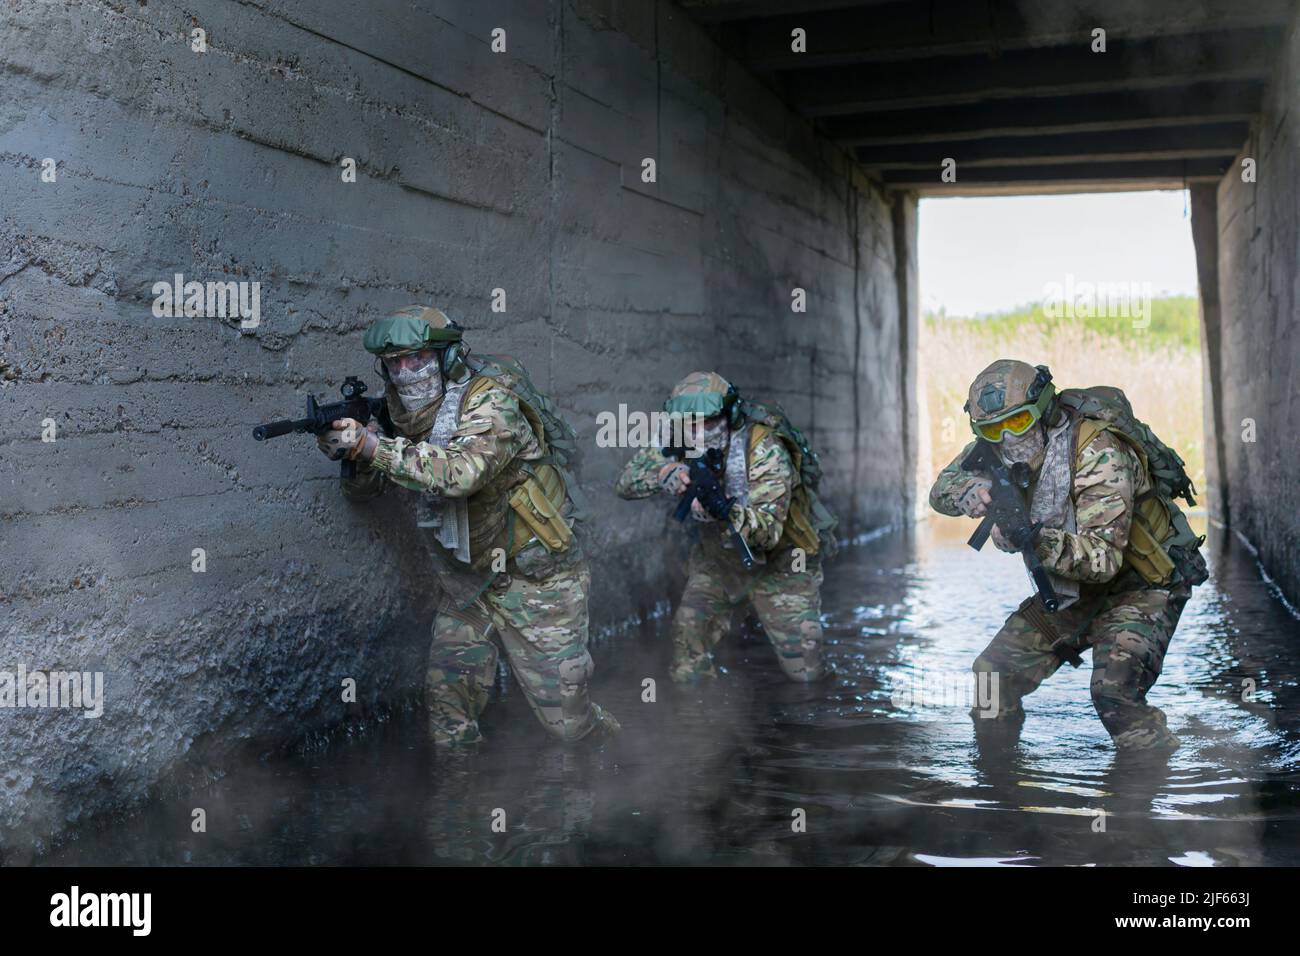 Three military mercenaries during special operation in underground bunker. Collage - one model in three poses. Focus on the left soldier. Stock Photo